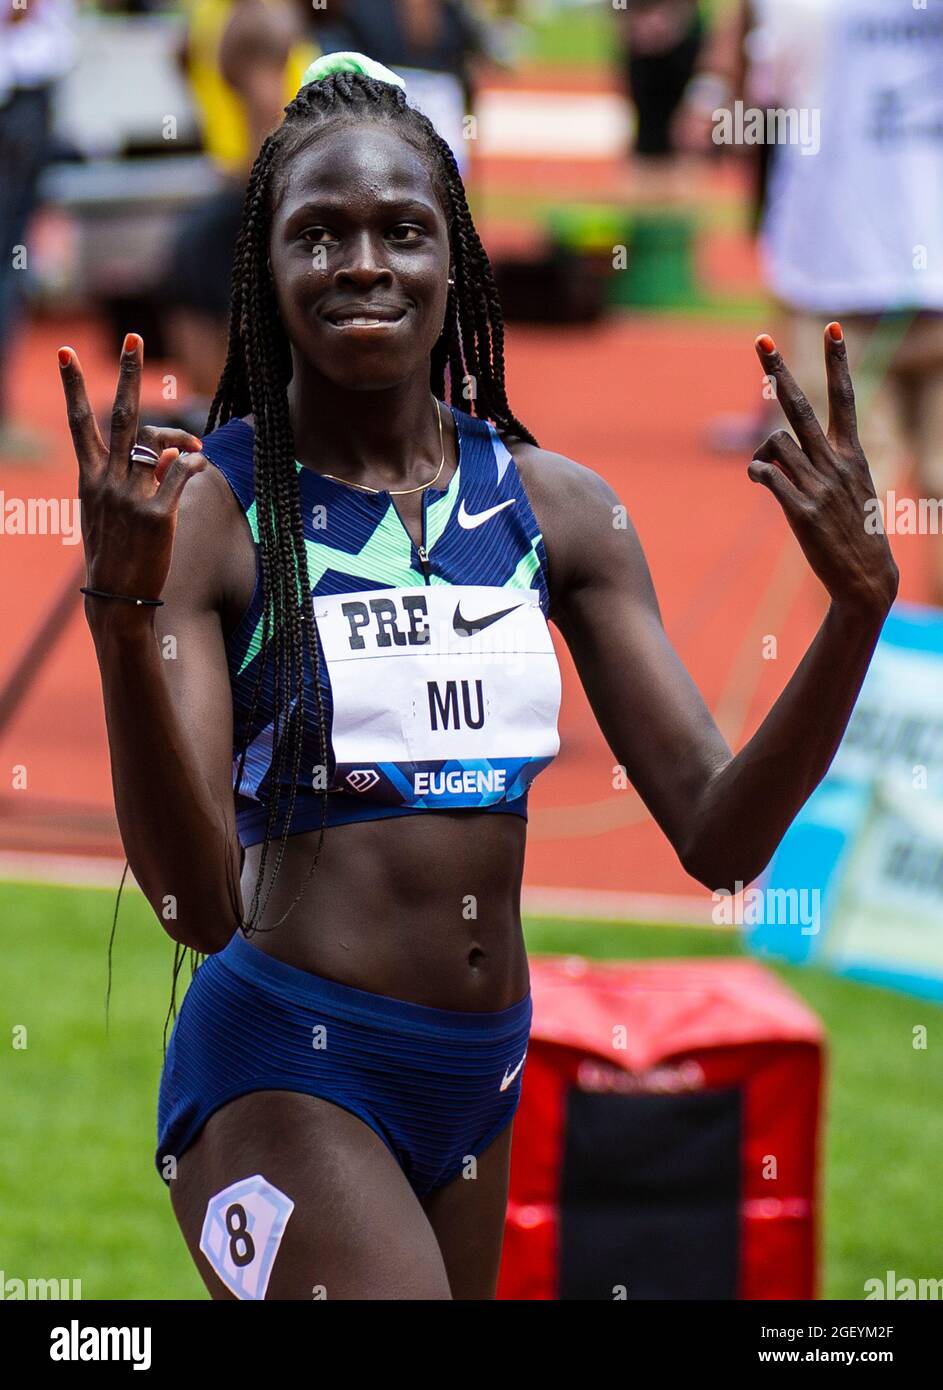 https://c8.alamy.com/comp/2GEYM2F/august-21-2021-eugene-or-usa-athing-mu-wins-the-womens-800-meters-race-and-set-4-records-during-the-nike-prefontaine-classic-at-hayward-field-eugene-or-thurman-jamescsm-2GEYM2F.jpg